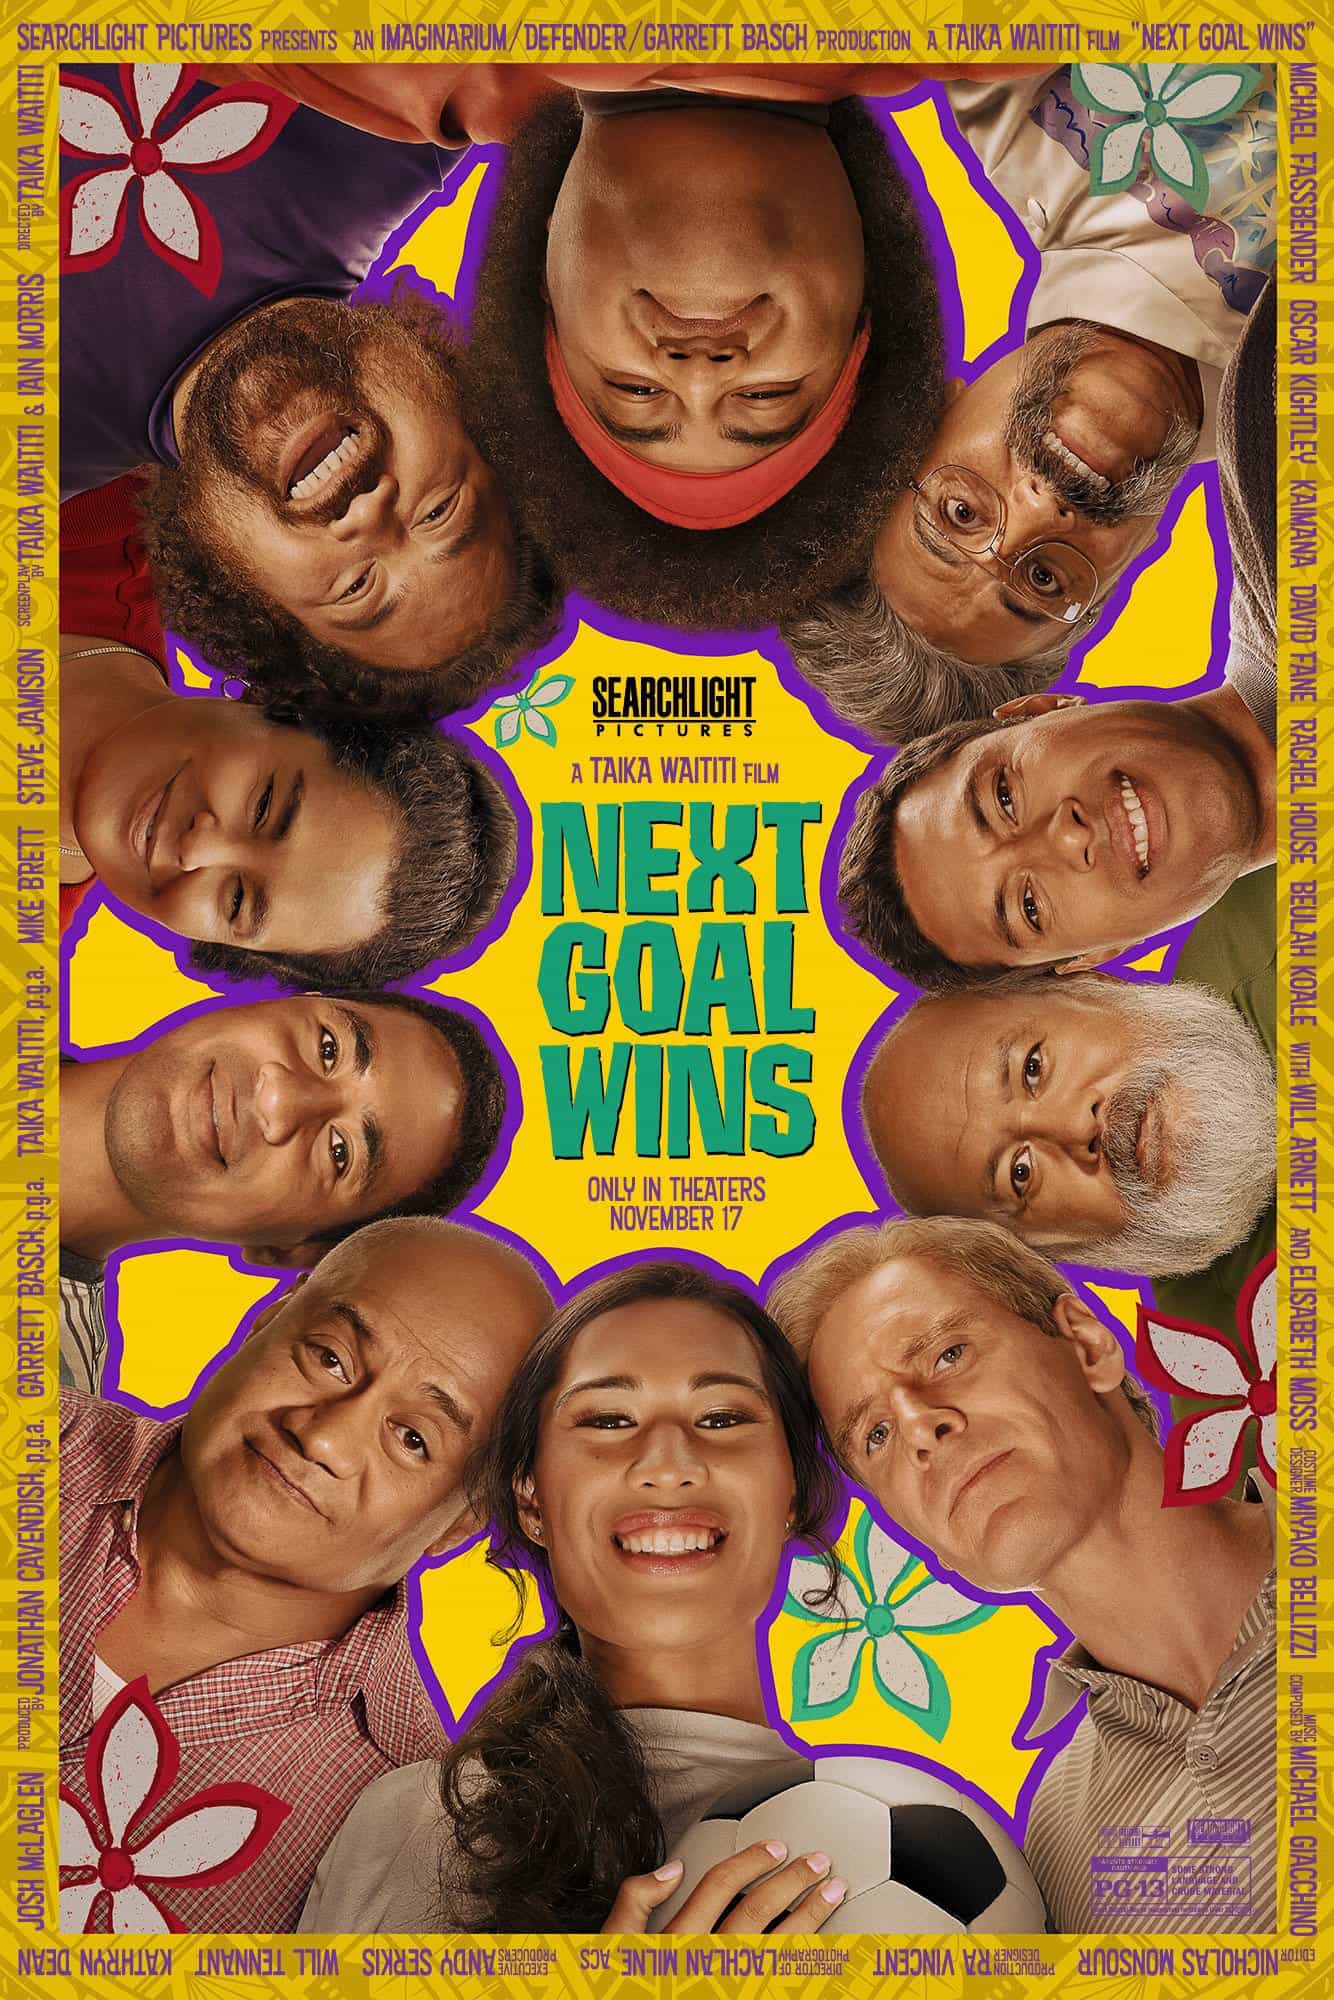 New poster has been released for Next Goal Wins which stars Michael Fassbender and Oscar Kightley - movie UK release date 17th November 2023 #nextgoalwins